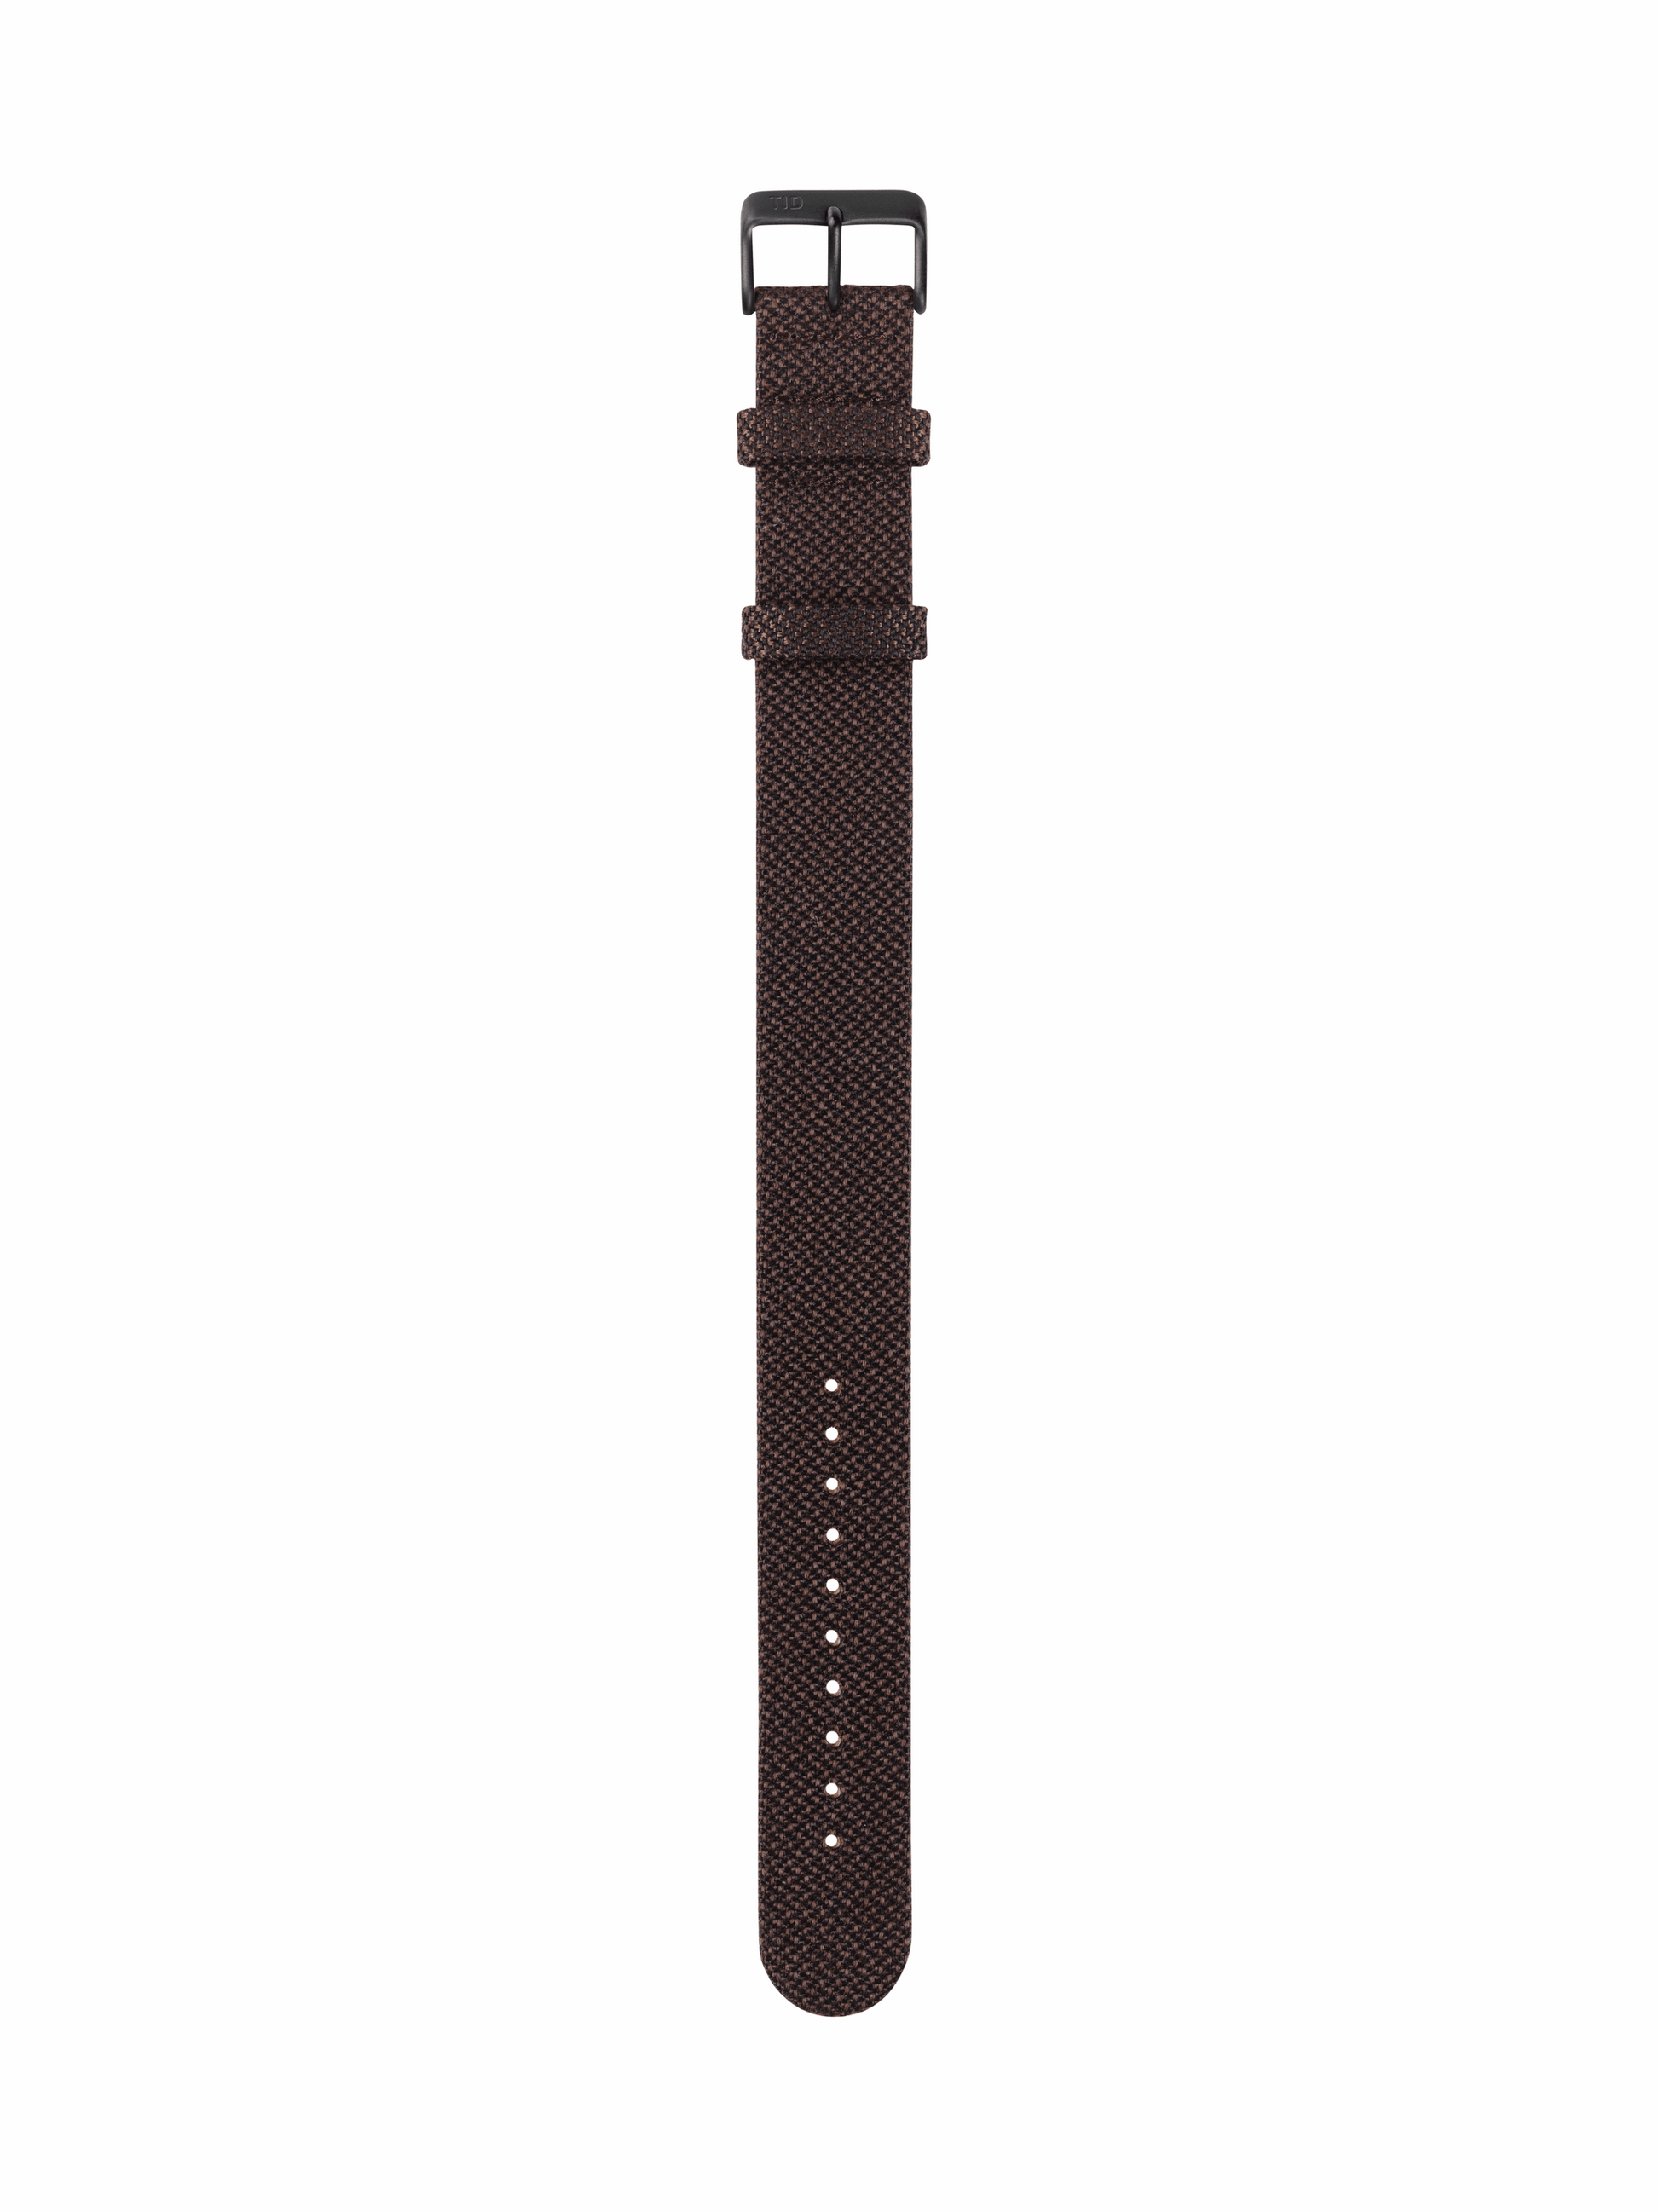 Mud Twain Strap with Black / Steel / Gold Buckle - TID WATCHES